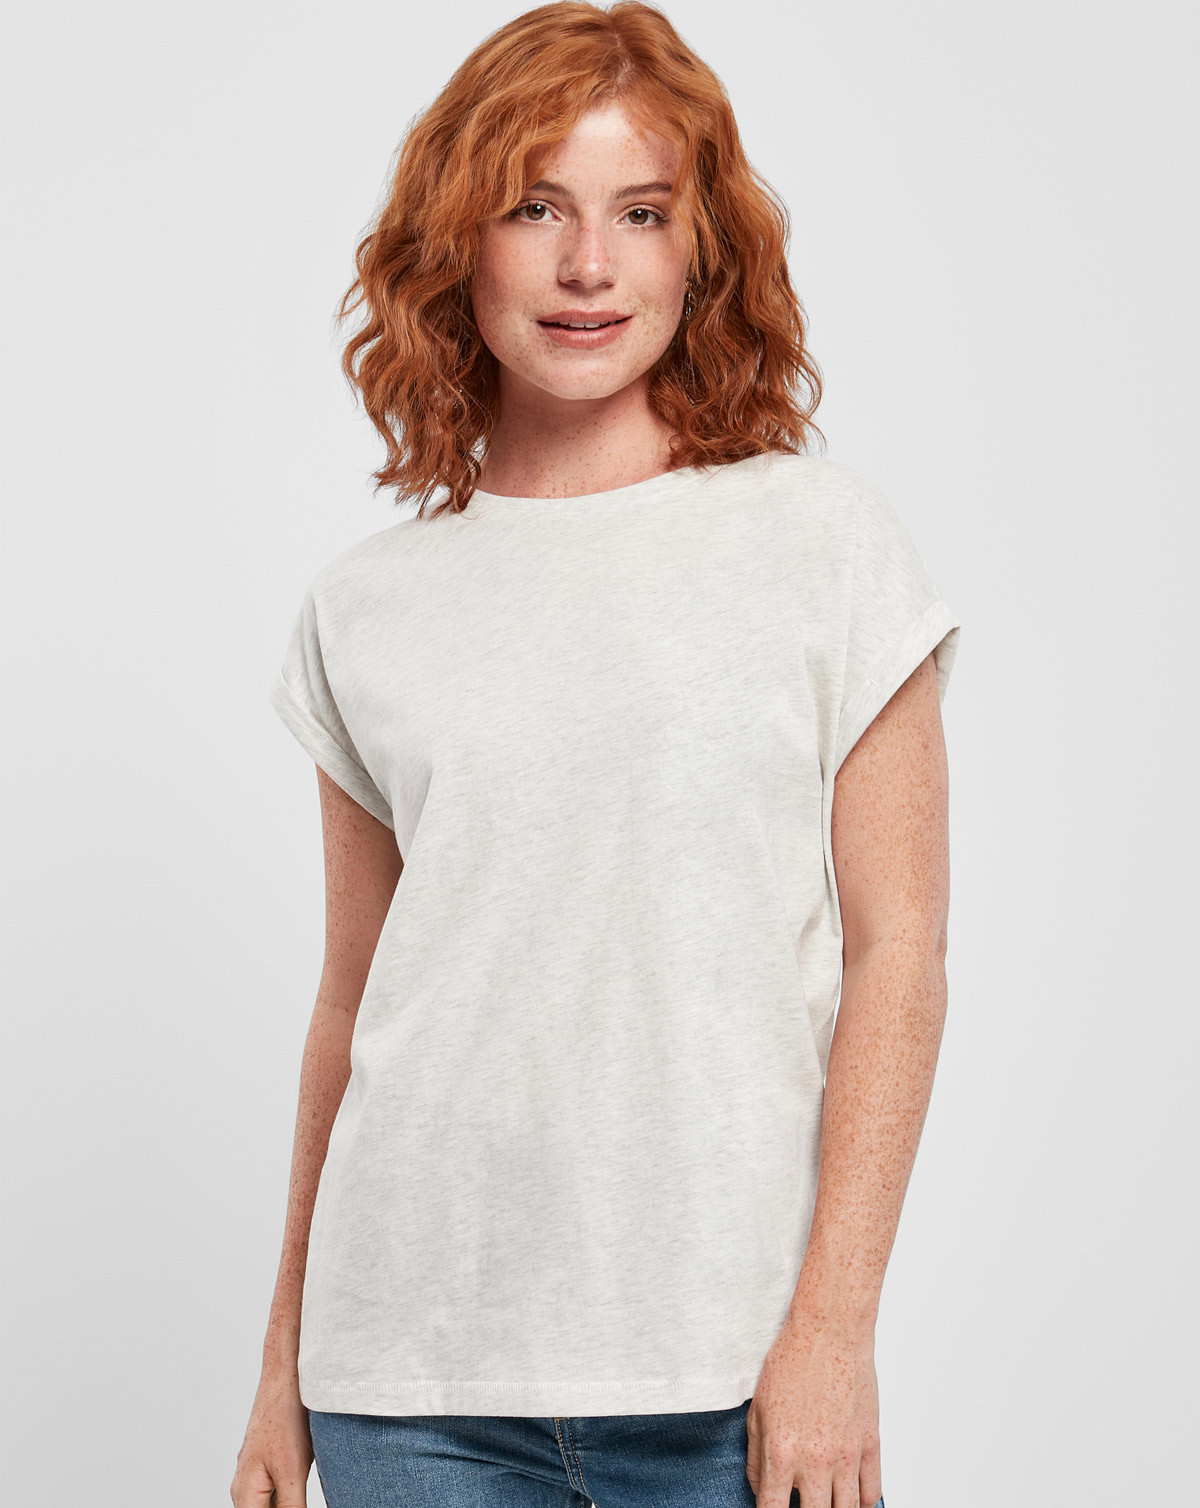 Urban Classics Ladies Extended Shoulder Tee (Lysegrå, XS)